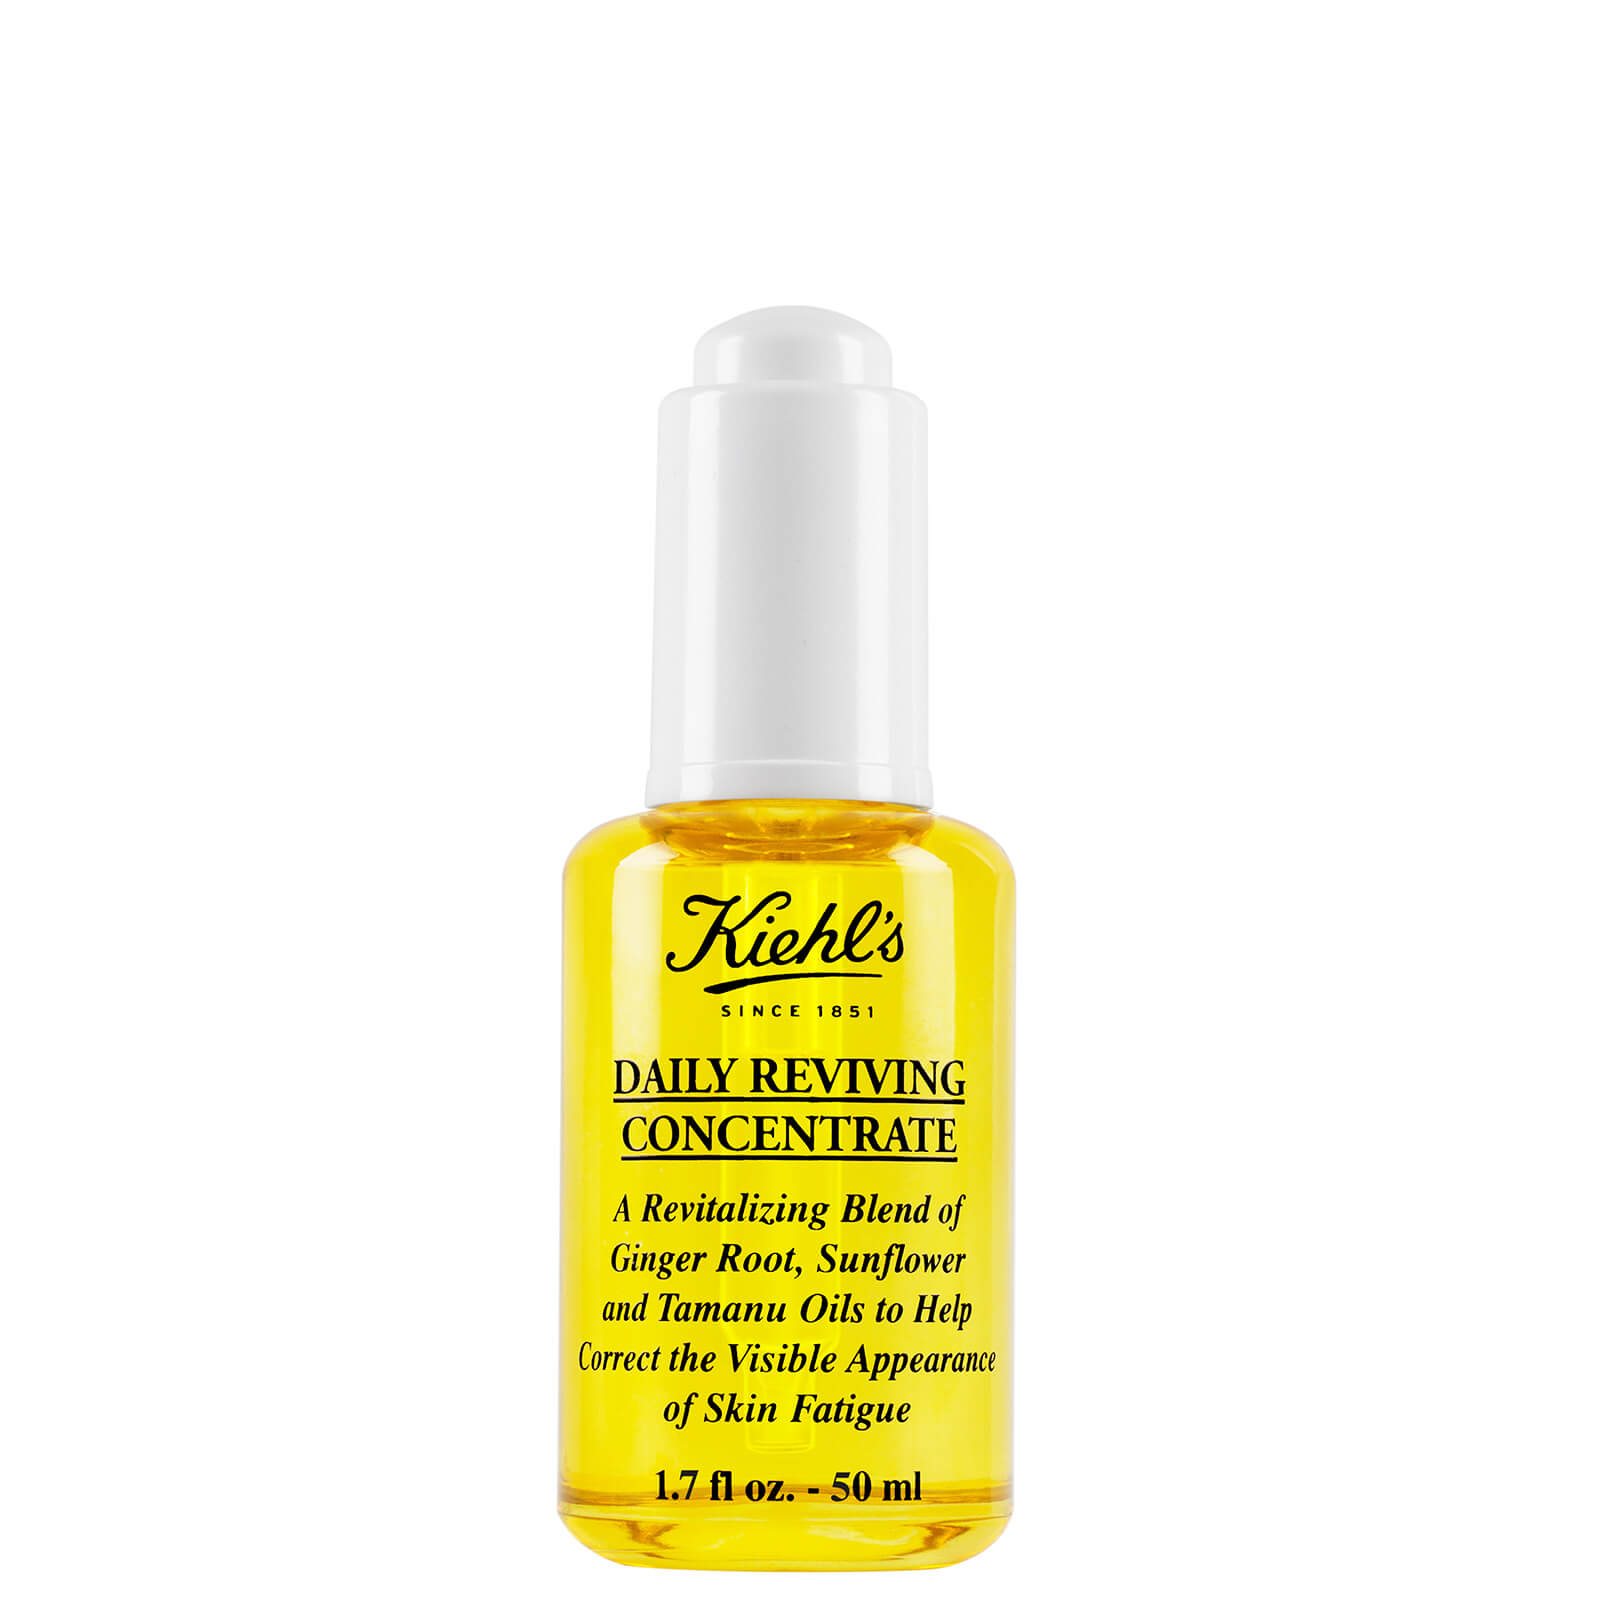 Kiehl's Daily Reviving Concentrate (Various Sizes) - 50ml